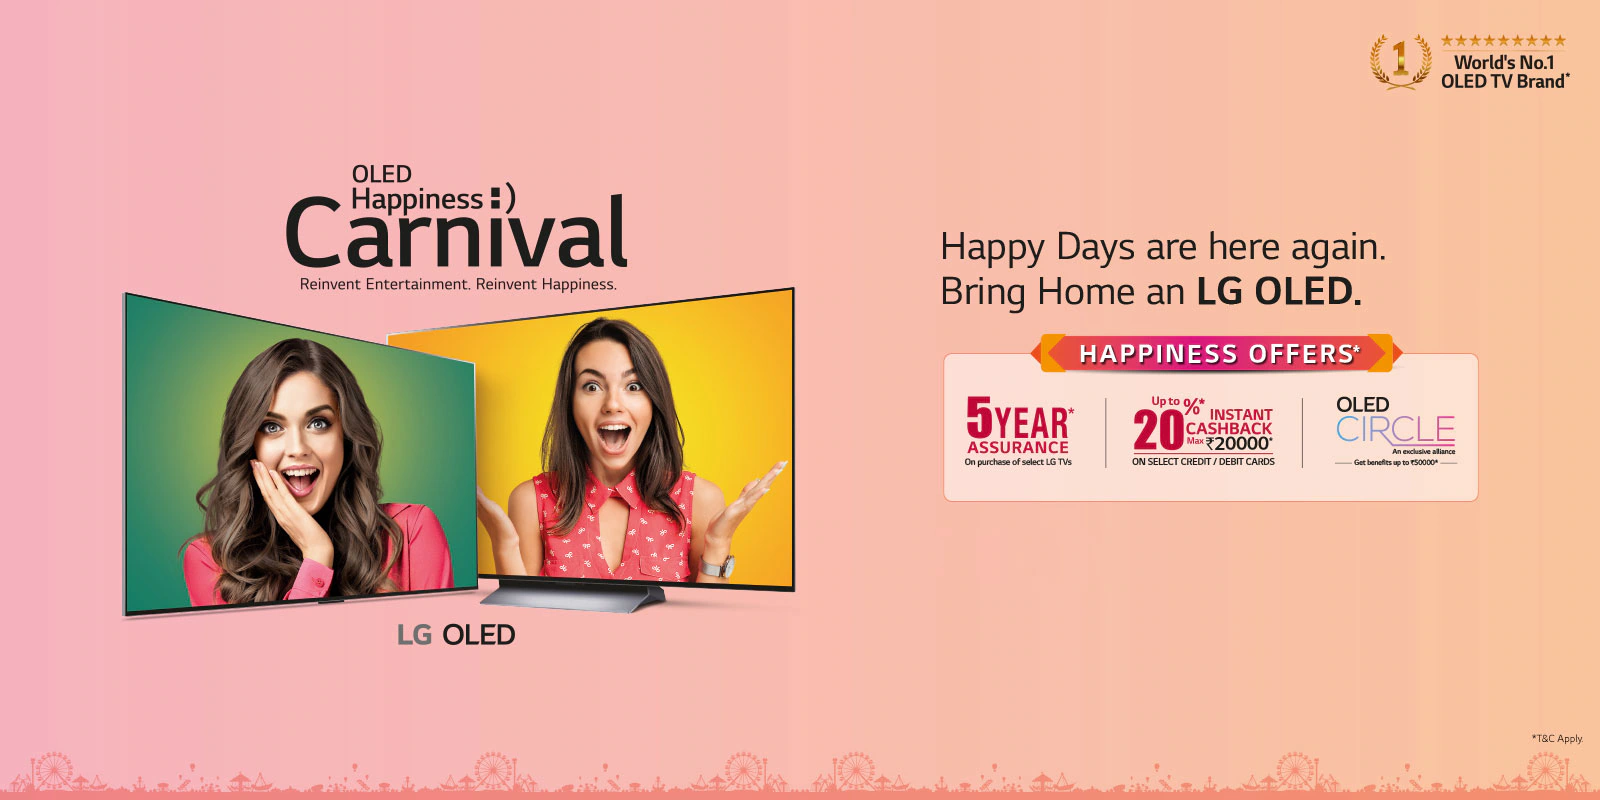 OLED-Happiness-Carnival-1600x800